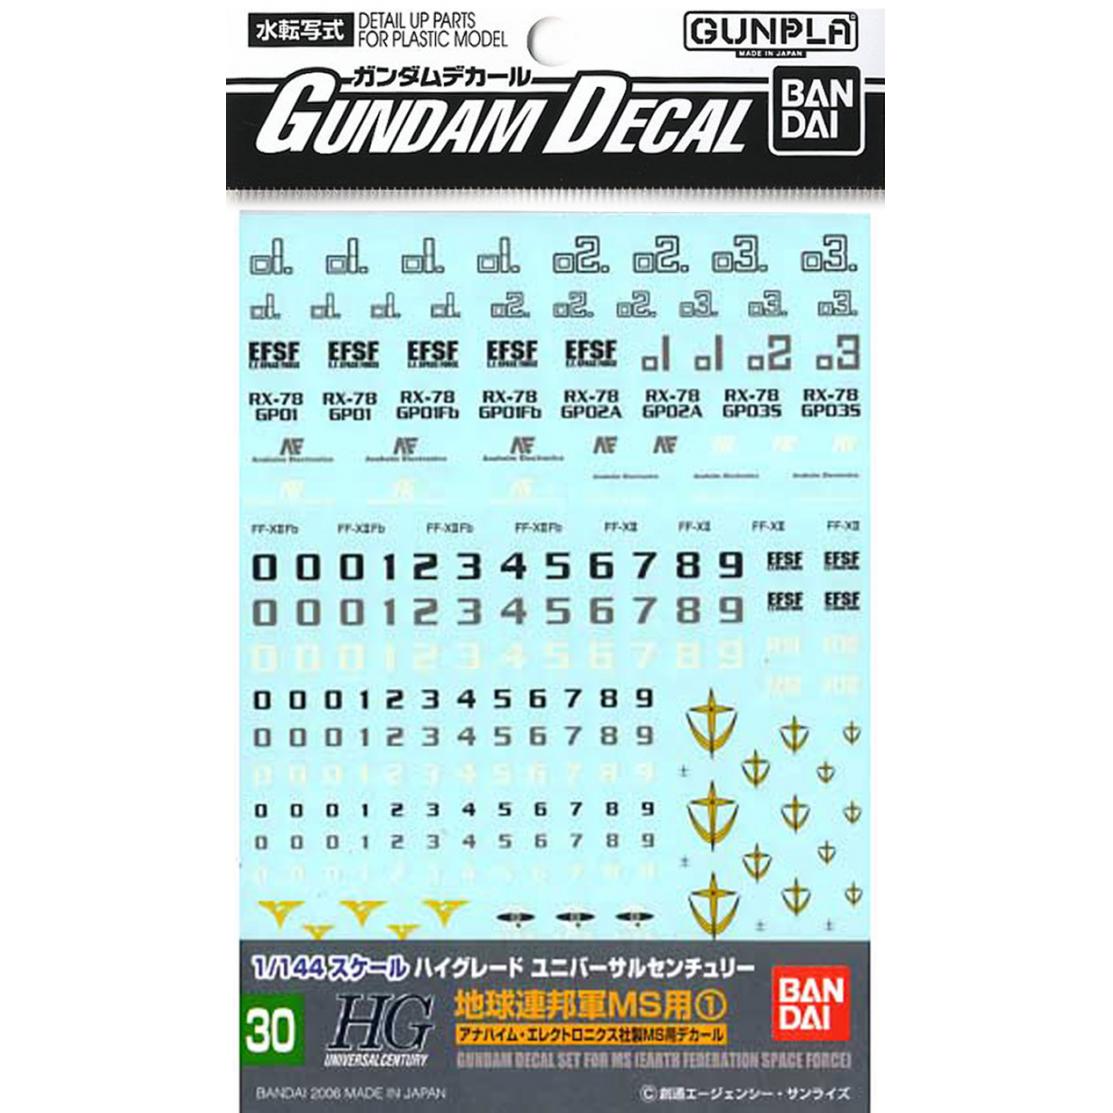 Gundam Decal 1/144 MS (Earth Federation Space Force)